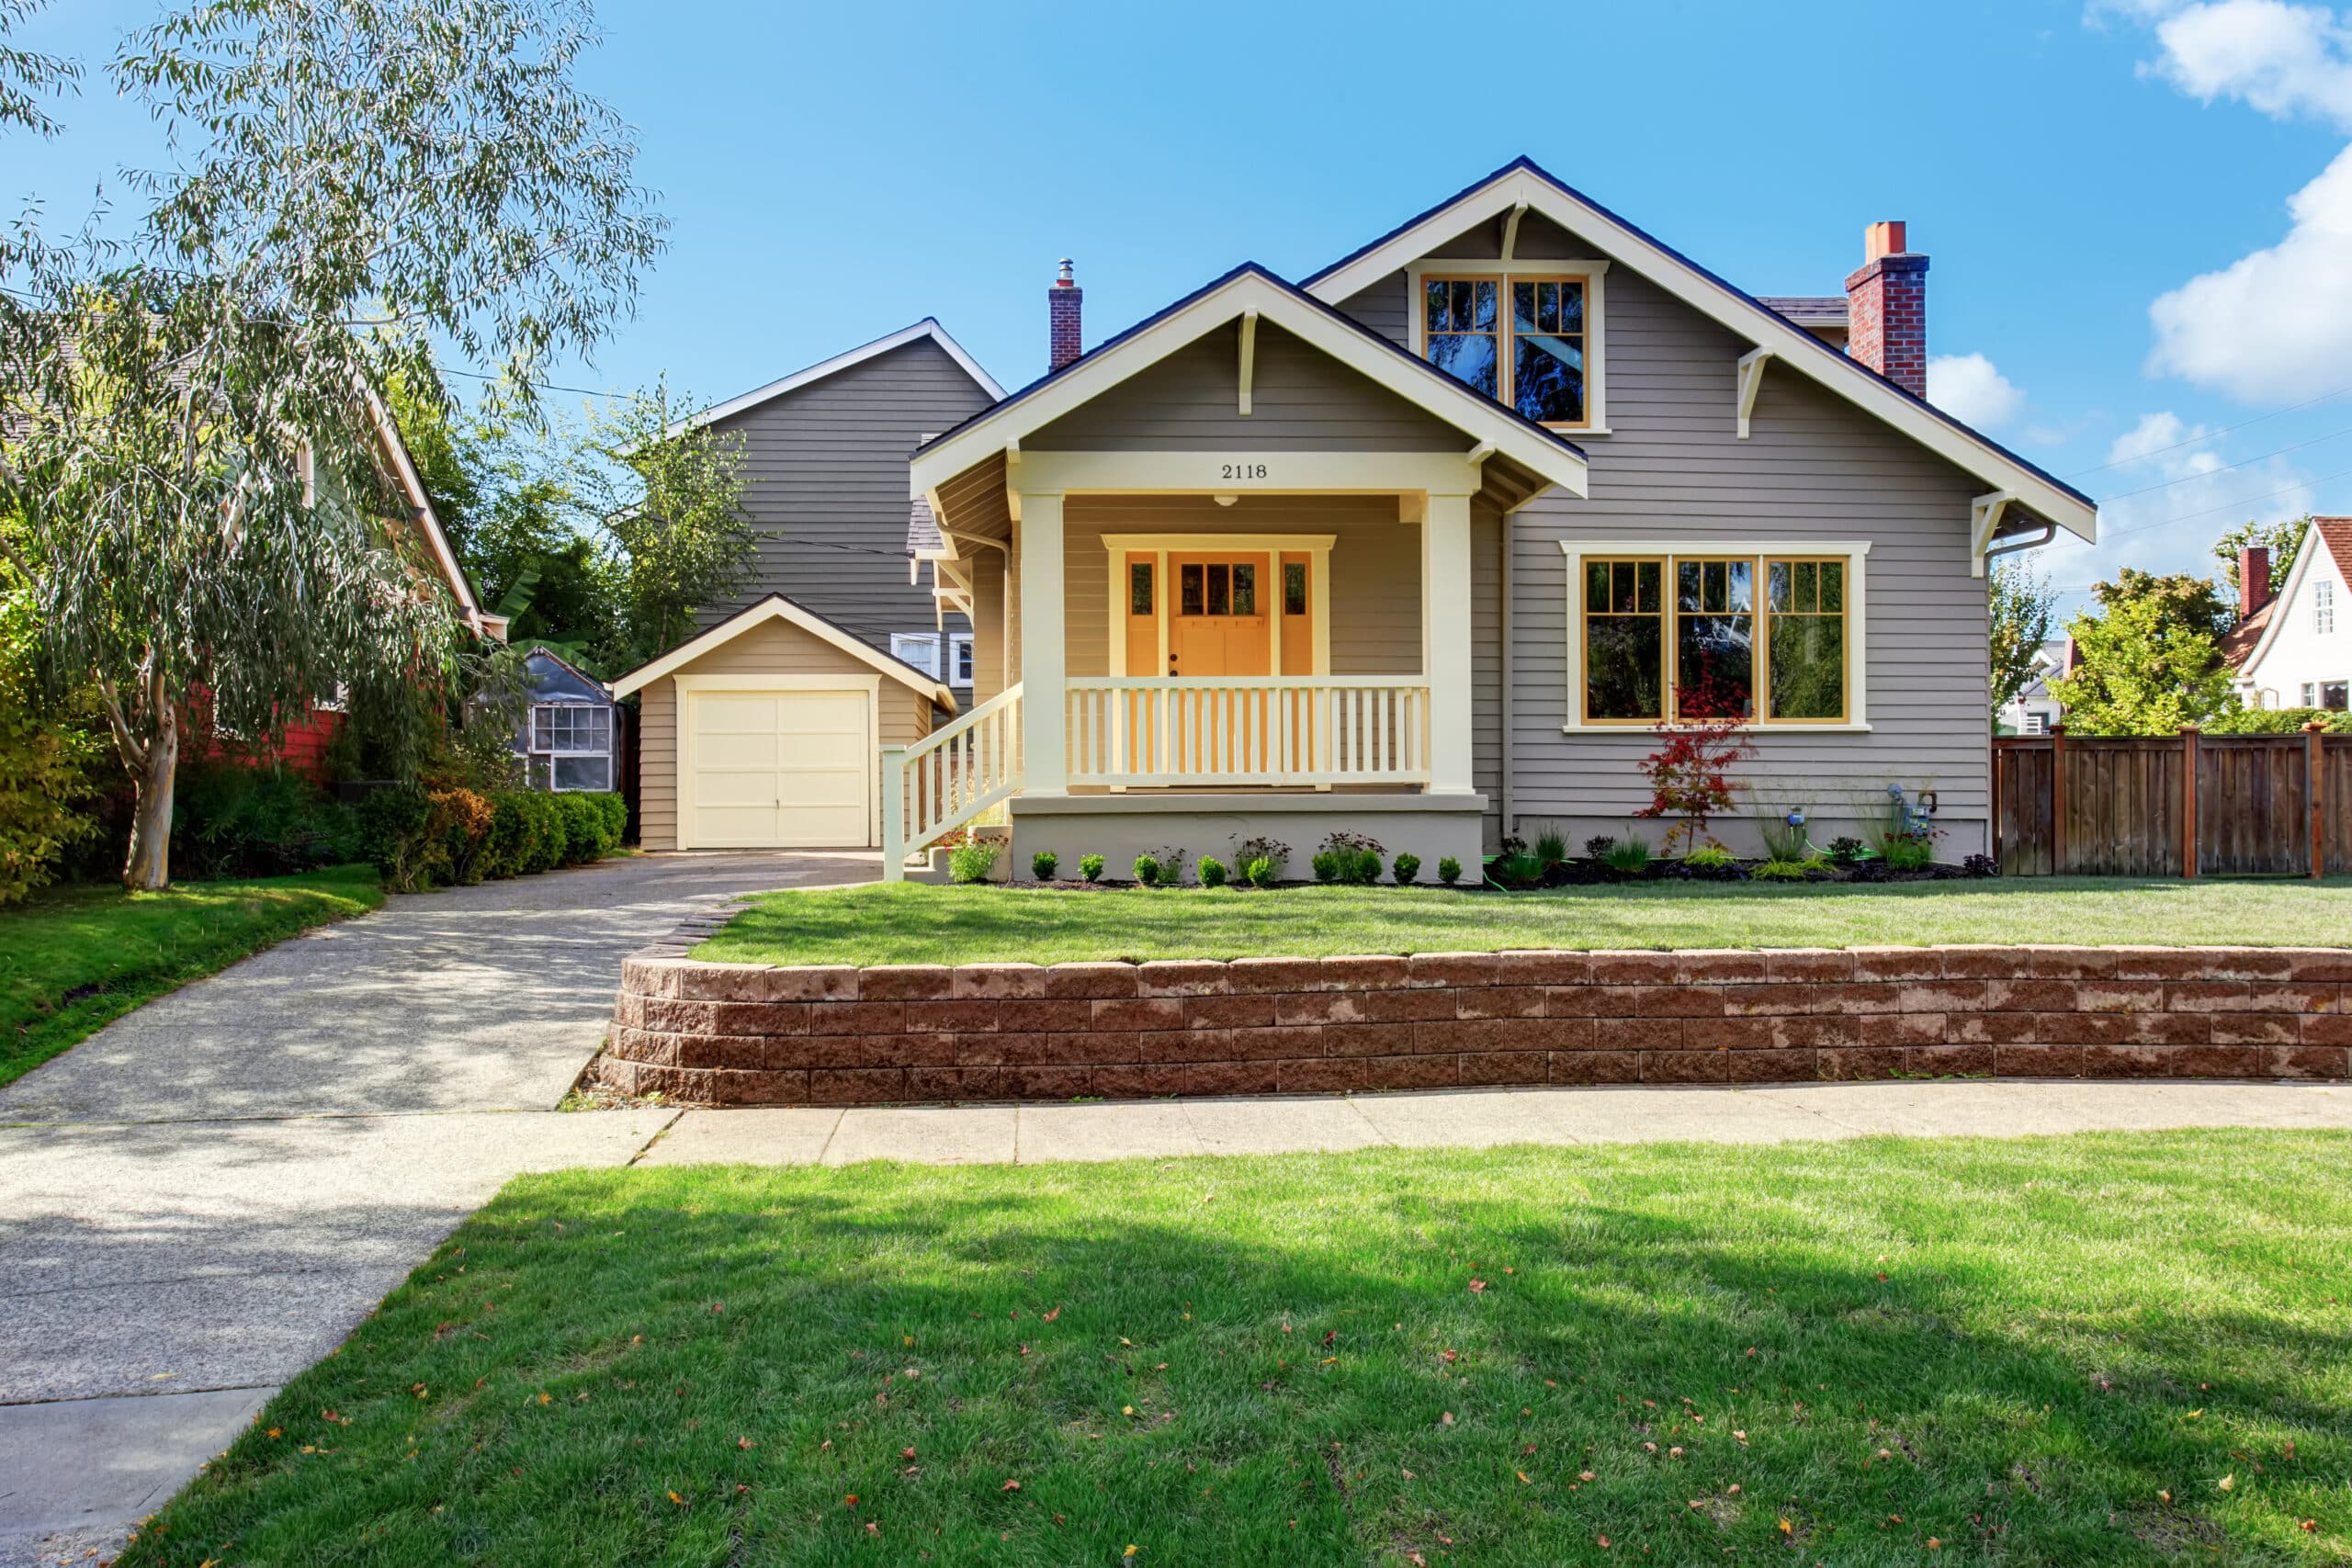 3 great reasons why building a home in utah is cheaper than buying Tooele, UT